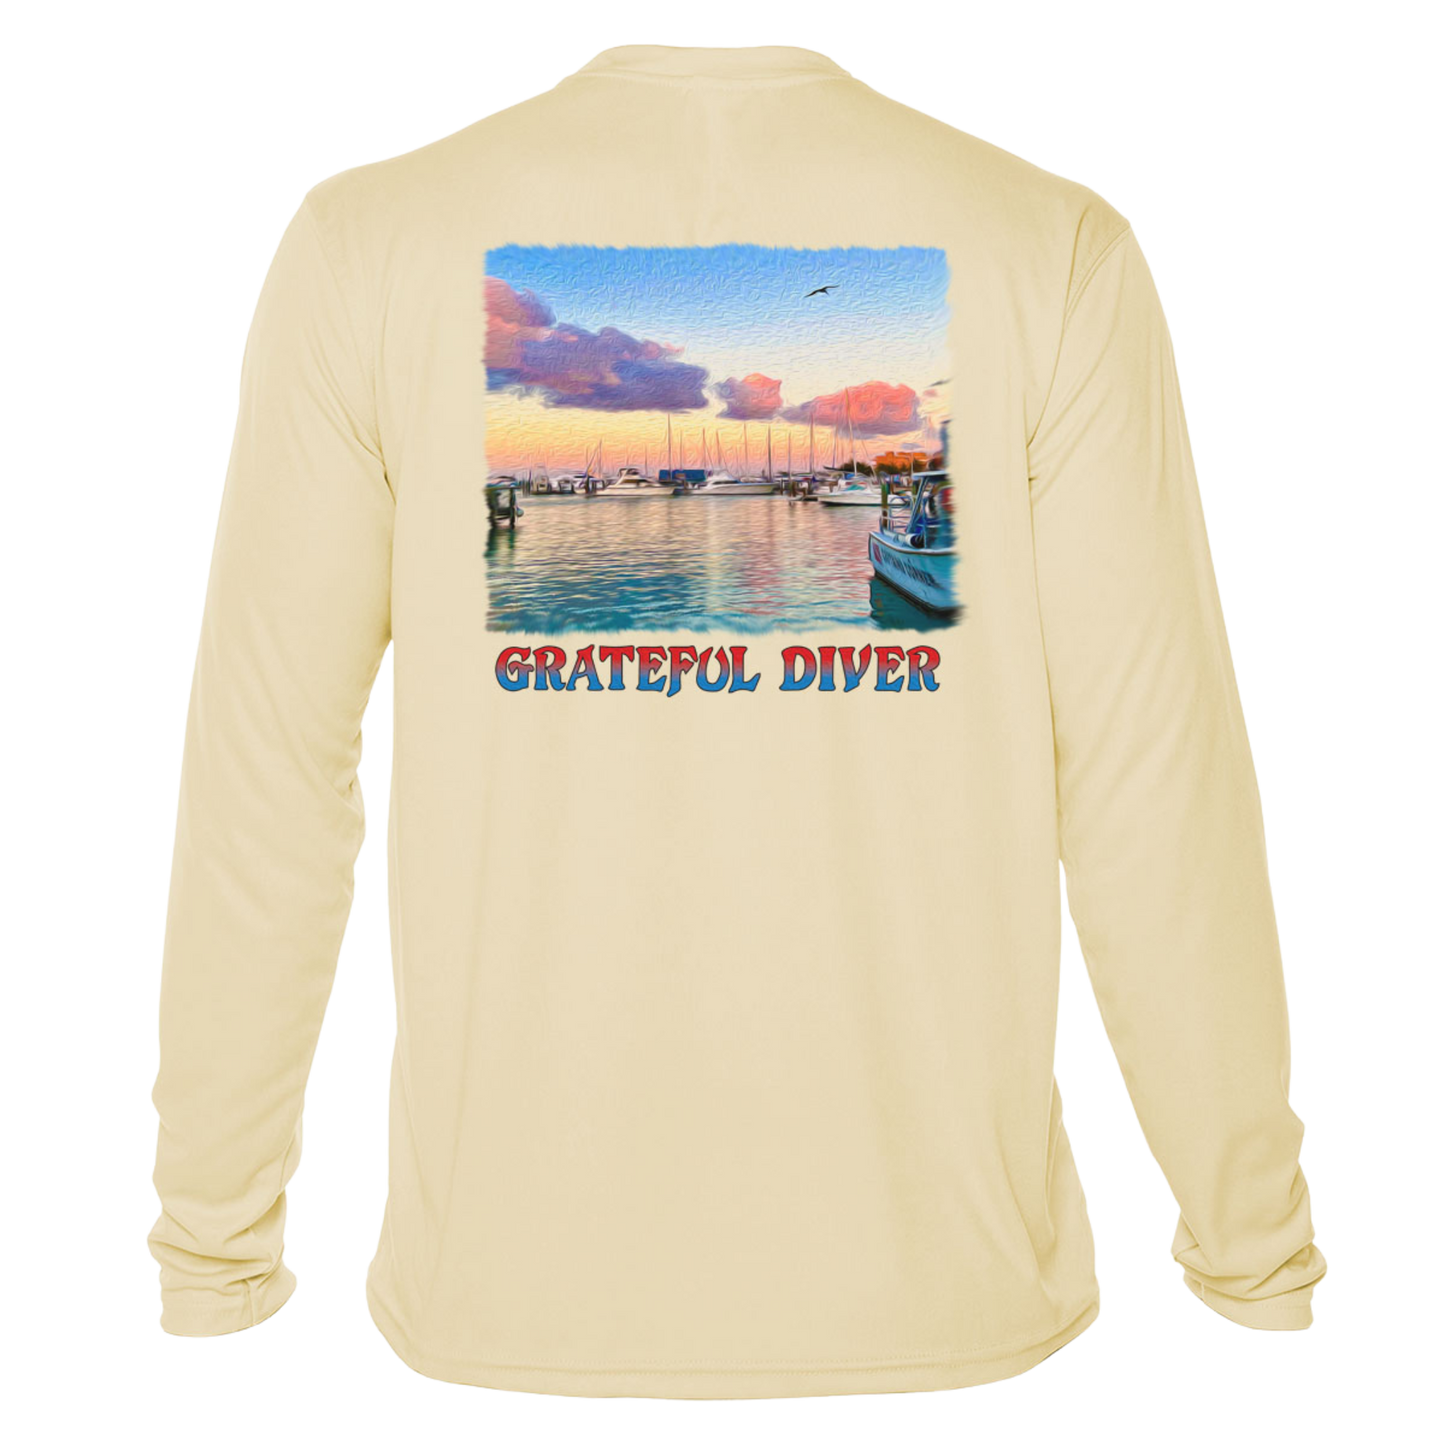 back of the Grateful Diver's Artist's Collection: Captain's Corner UV Shirt in pale yellow showing docked boats at sunrise